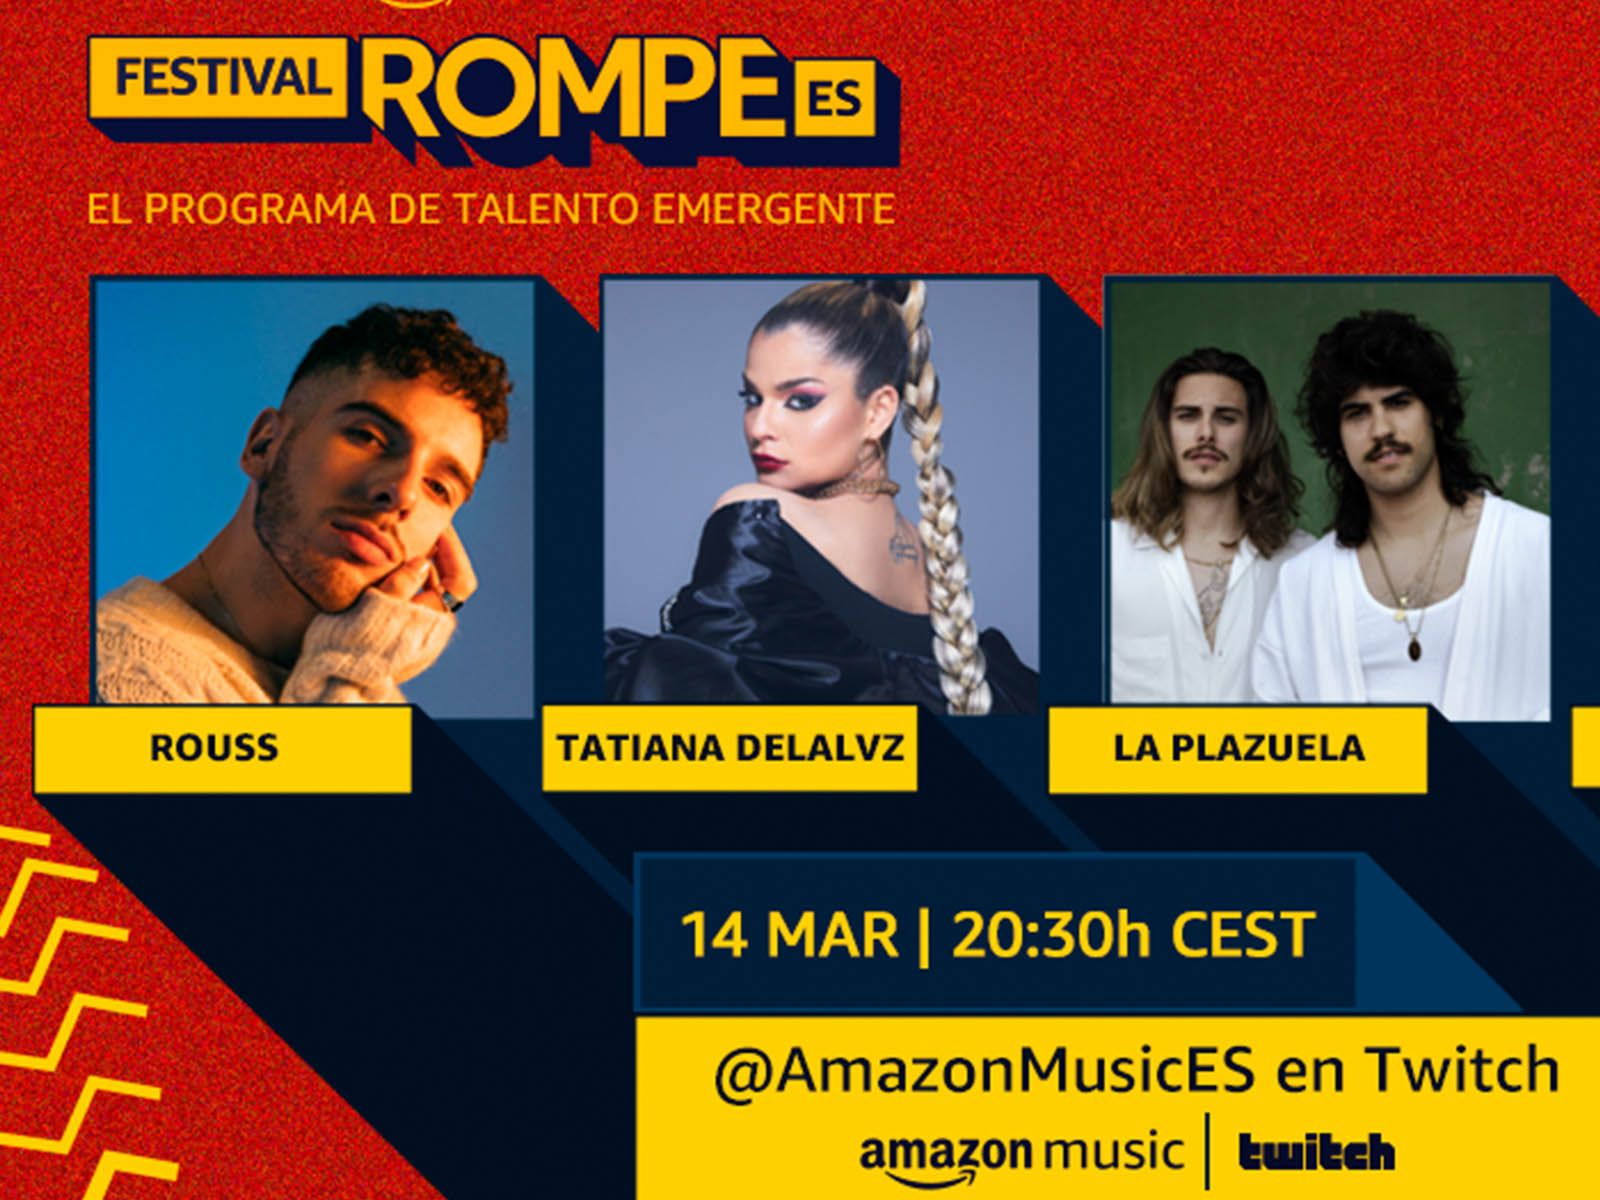 The second edition of Amazon Music’s ROMPE Festival is back